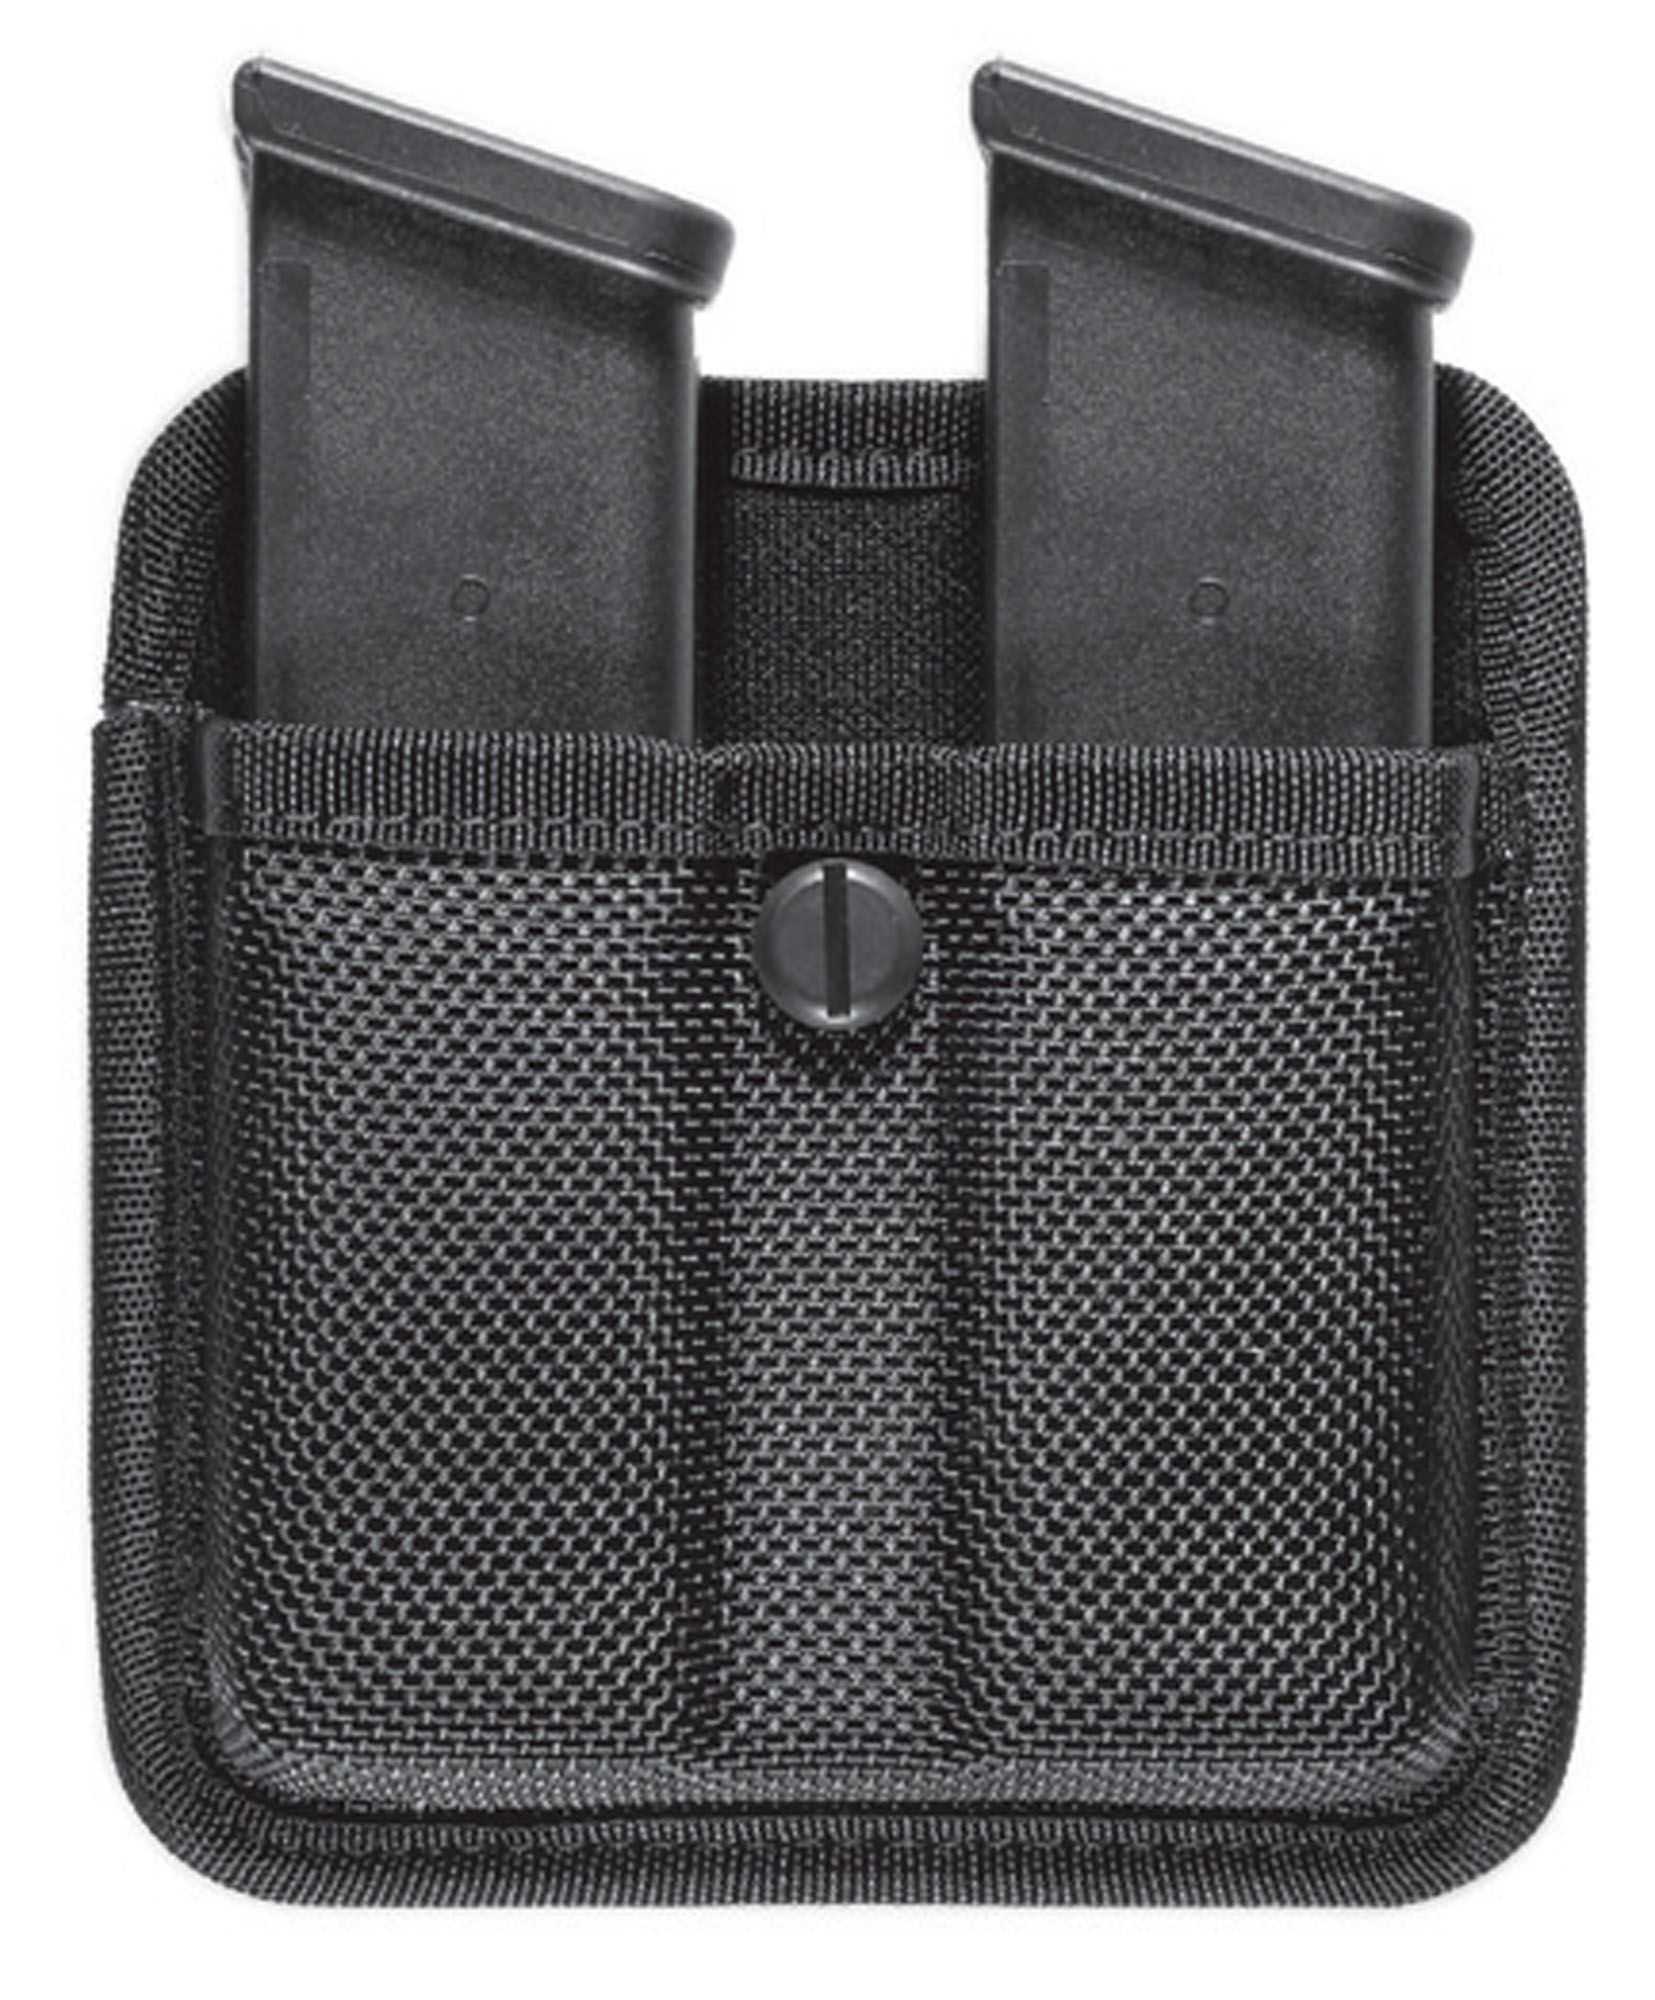 Bianchi 22197 AccuMold Double Magazine Pouch Black Basketweave for Glock 20 